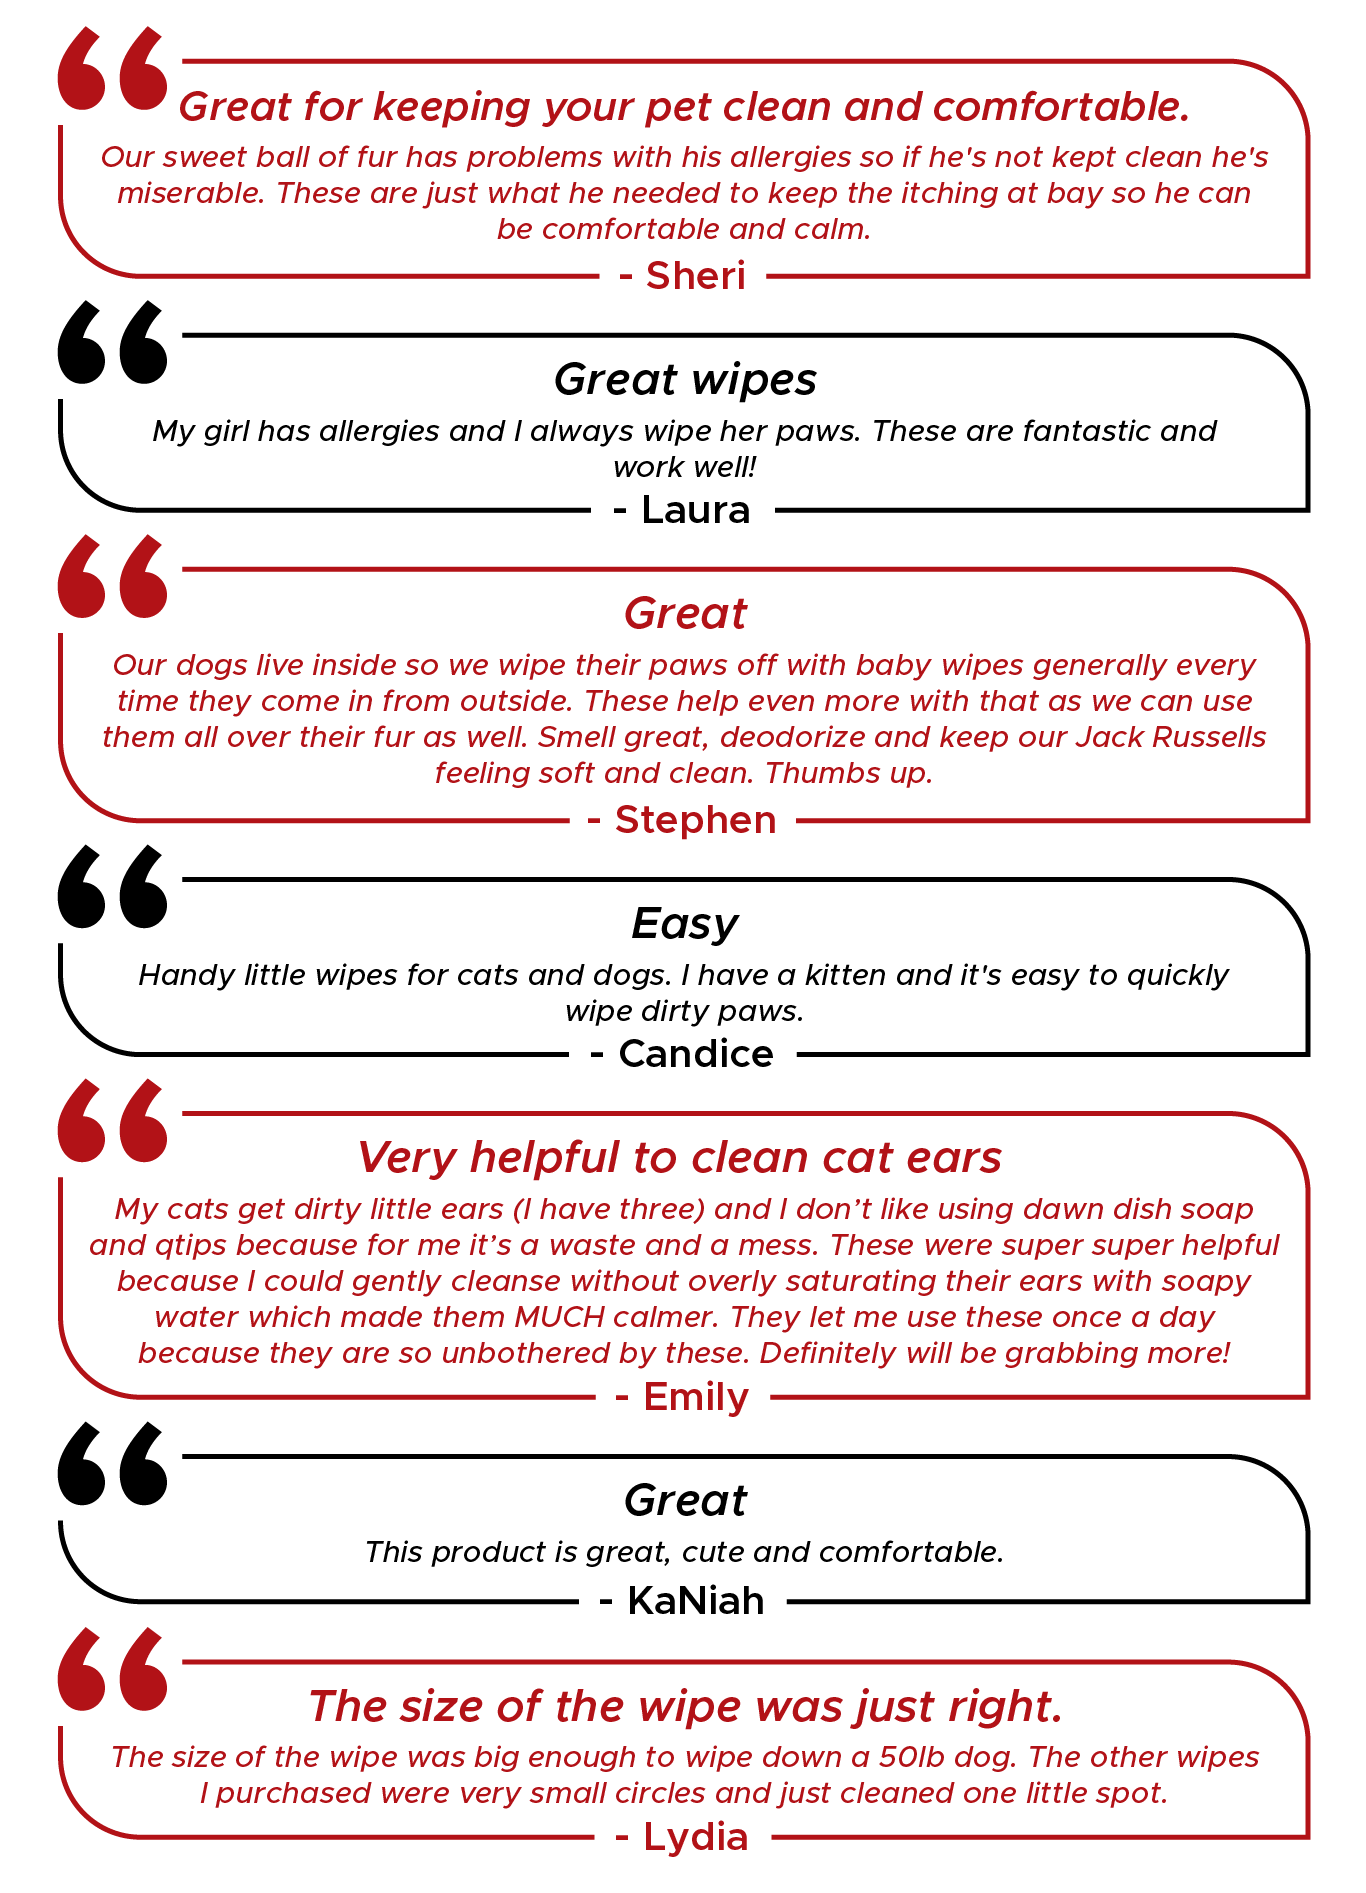 Customers said many amazing things about our PawsFurUs Pet Wipes. They all loved them!